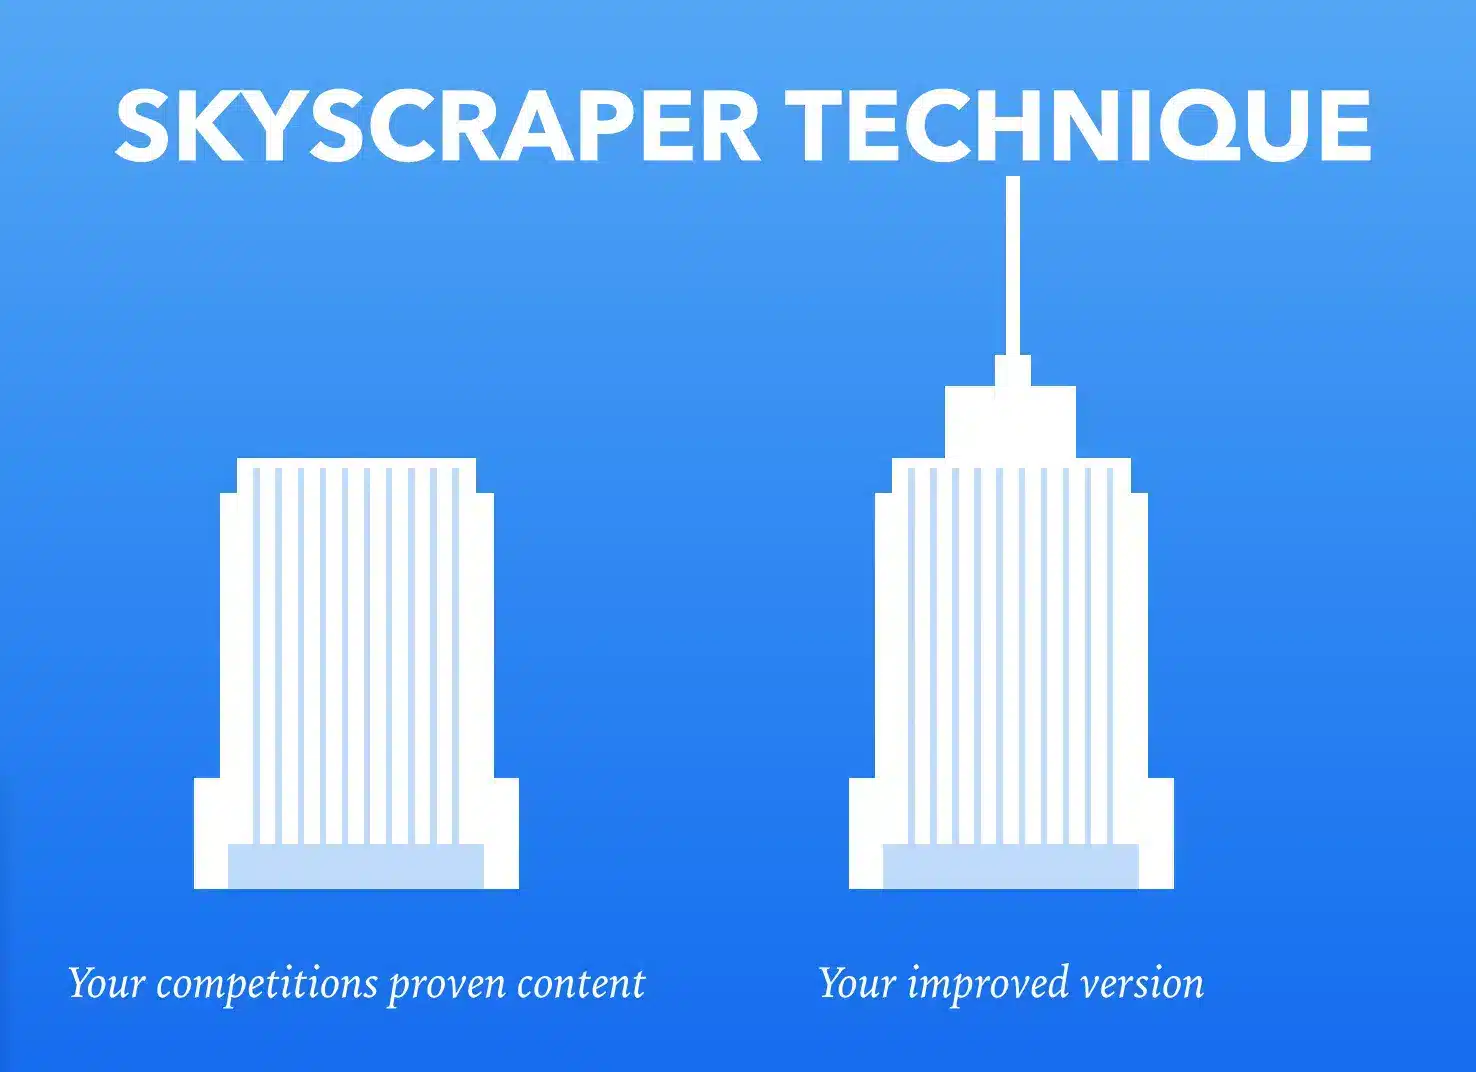 illustration shows difference between your content and competitor content when using the Skyscraper Technique